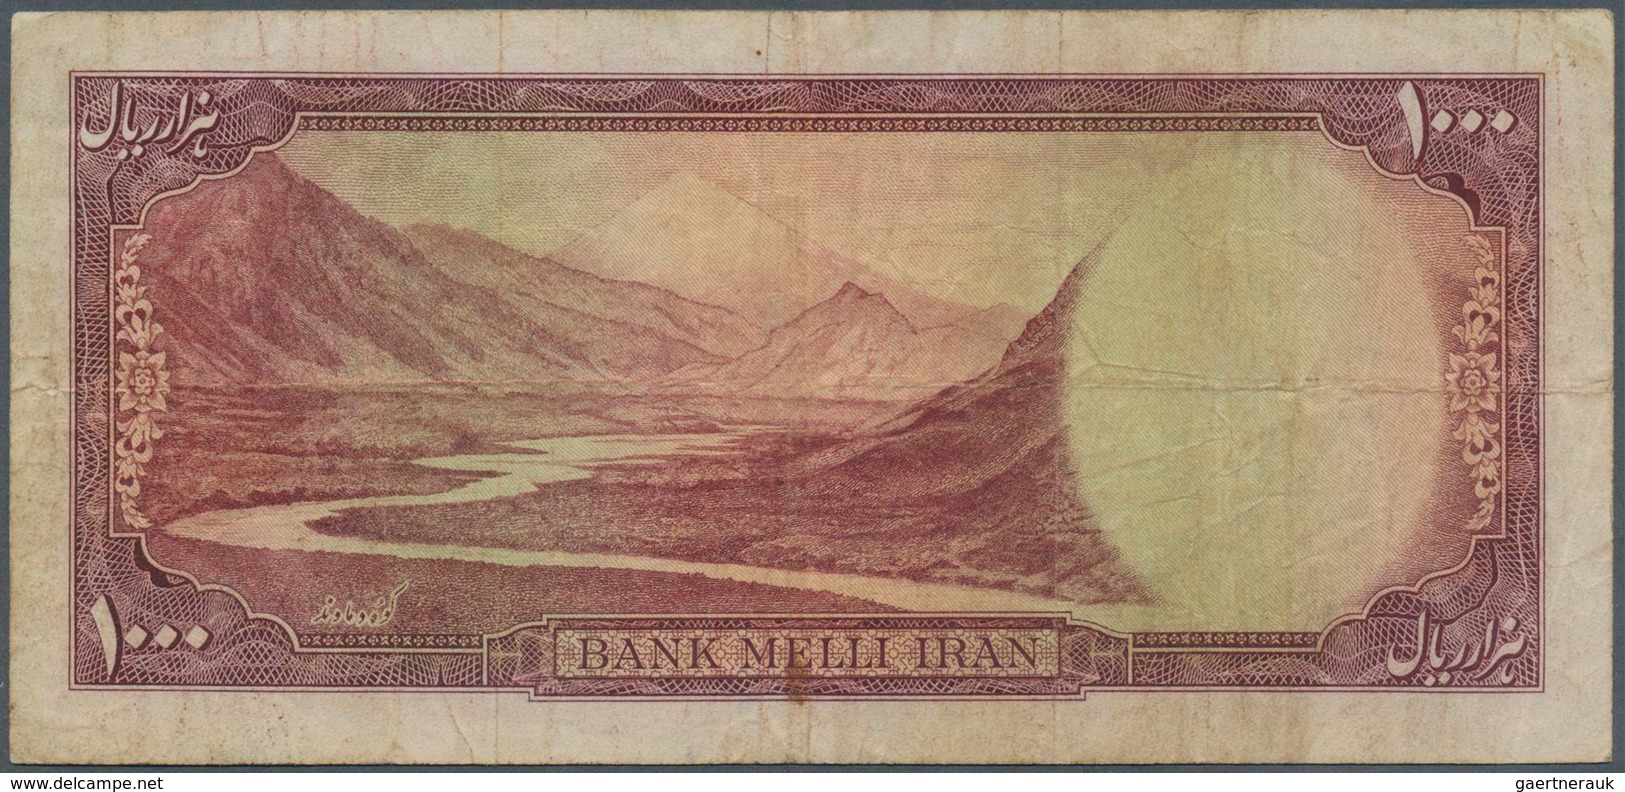 Iran: 1000 Rials 1951 P. 53 In Used Condition With Several Folds And Creases But Not Washed Or Press - Iran